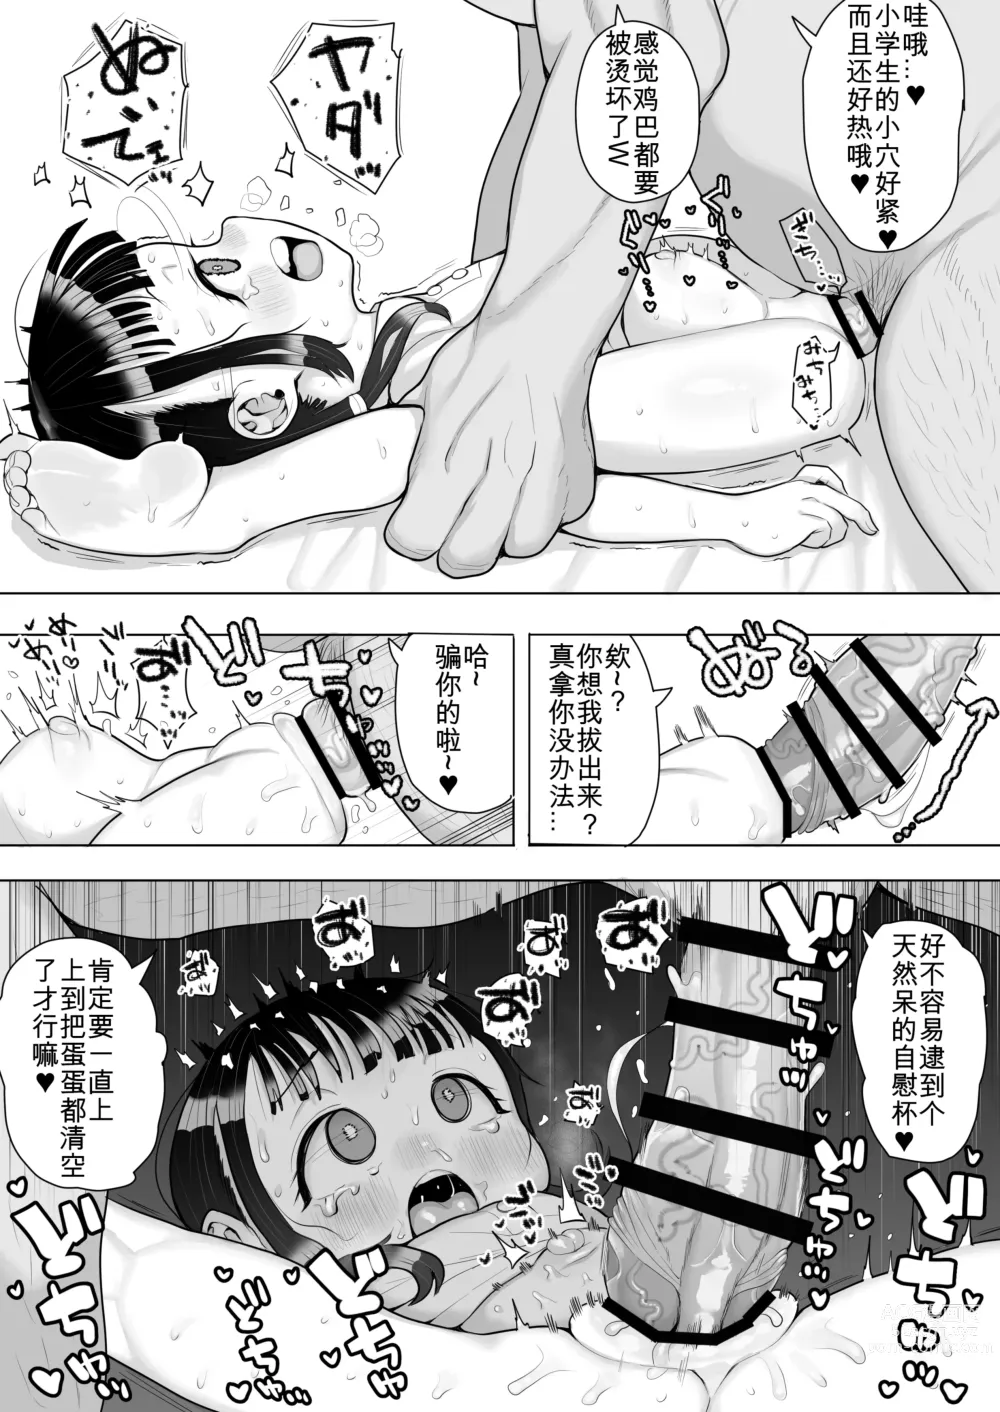 Page 8 of doujinshi Idol research students instant eating manga + ignorant s lower grade student's vaginal ejaculation 3some manga